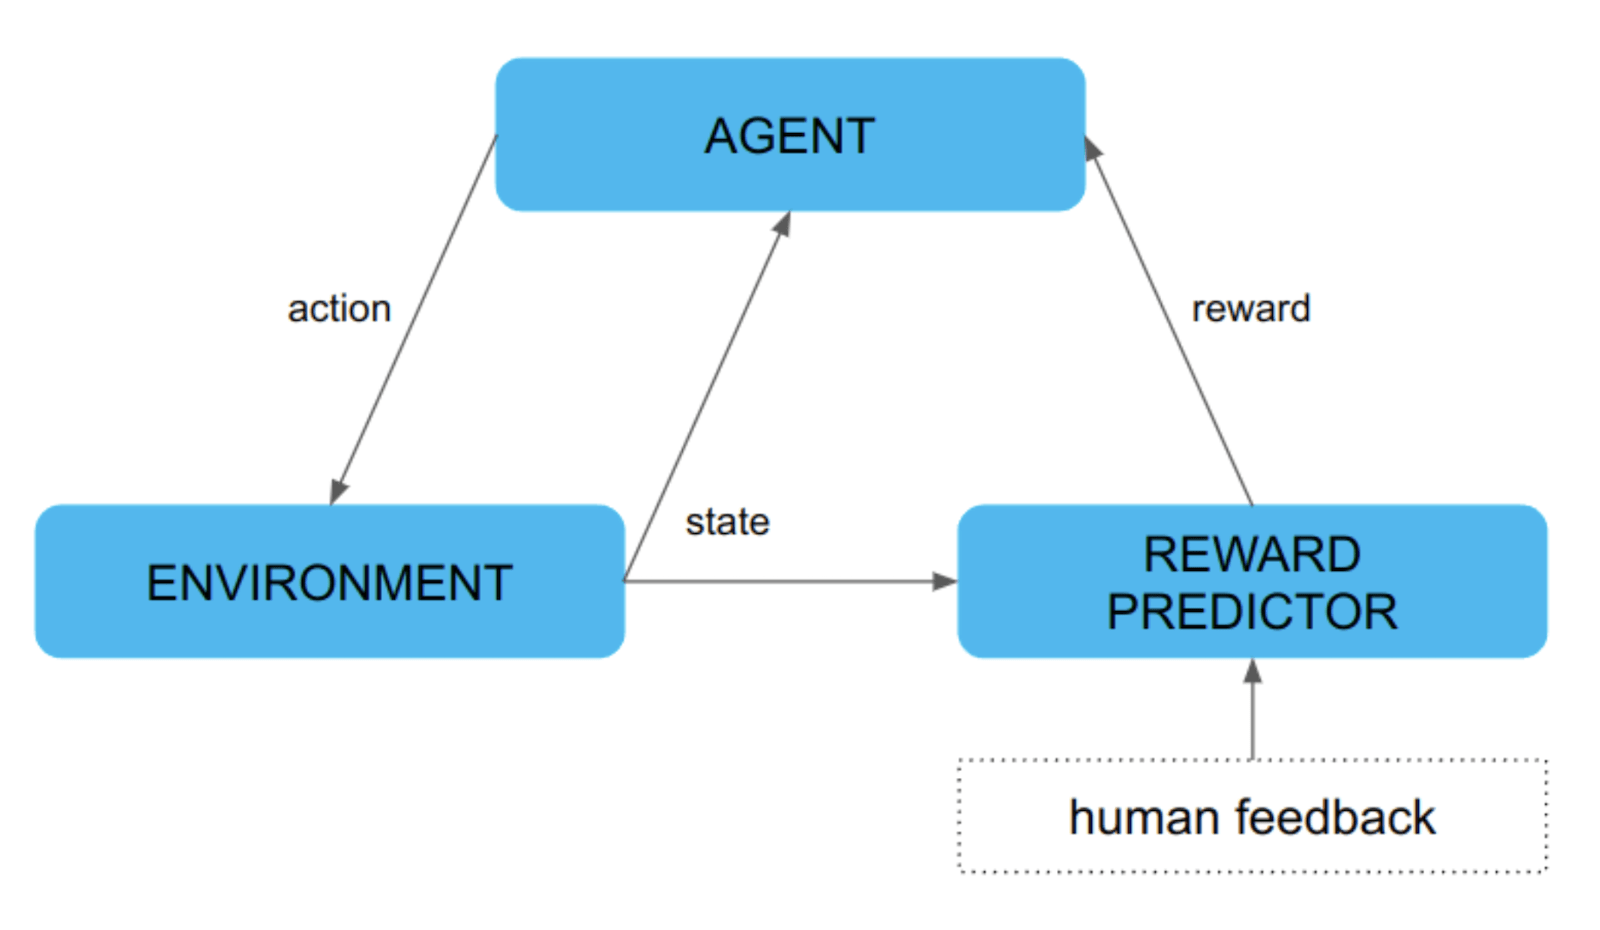 Figure 4: Reinforcement learning from human feedback training loop. Source: own elaboration